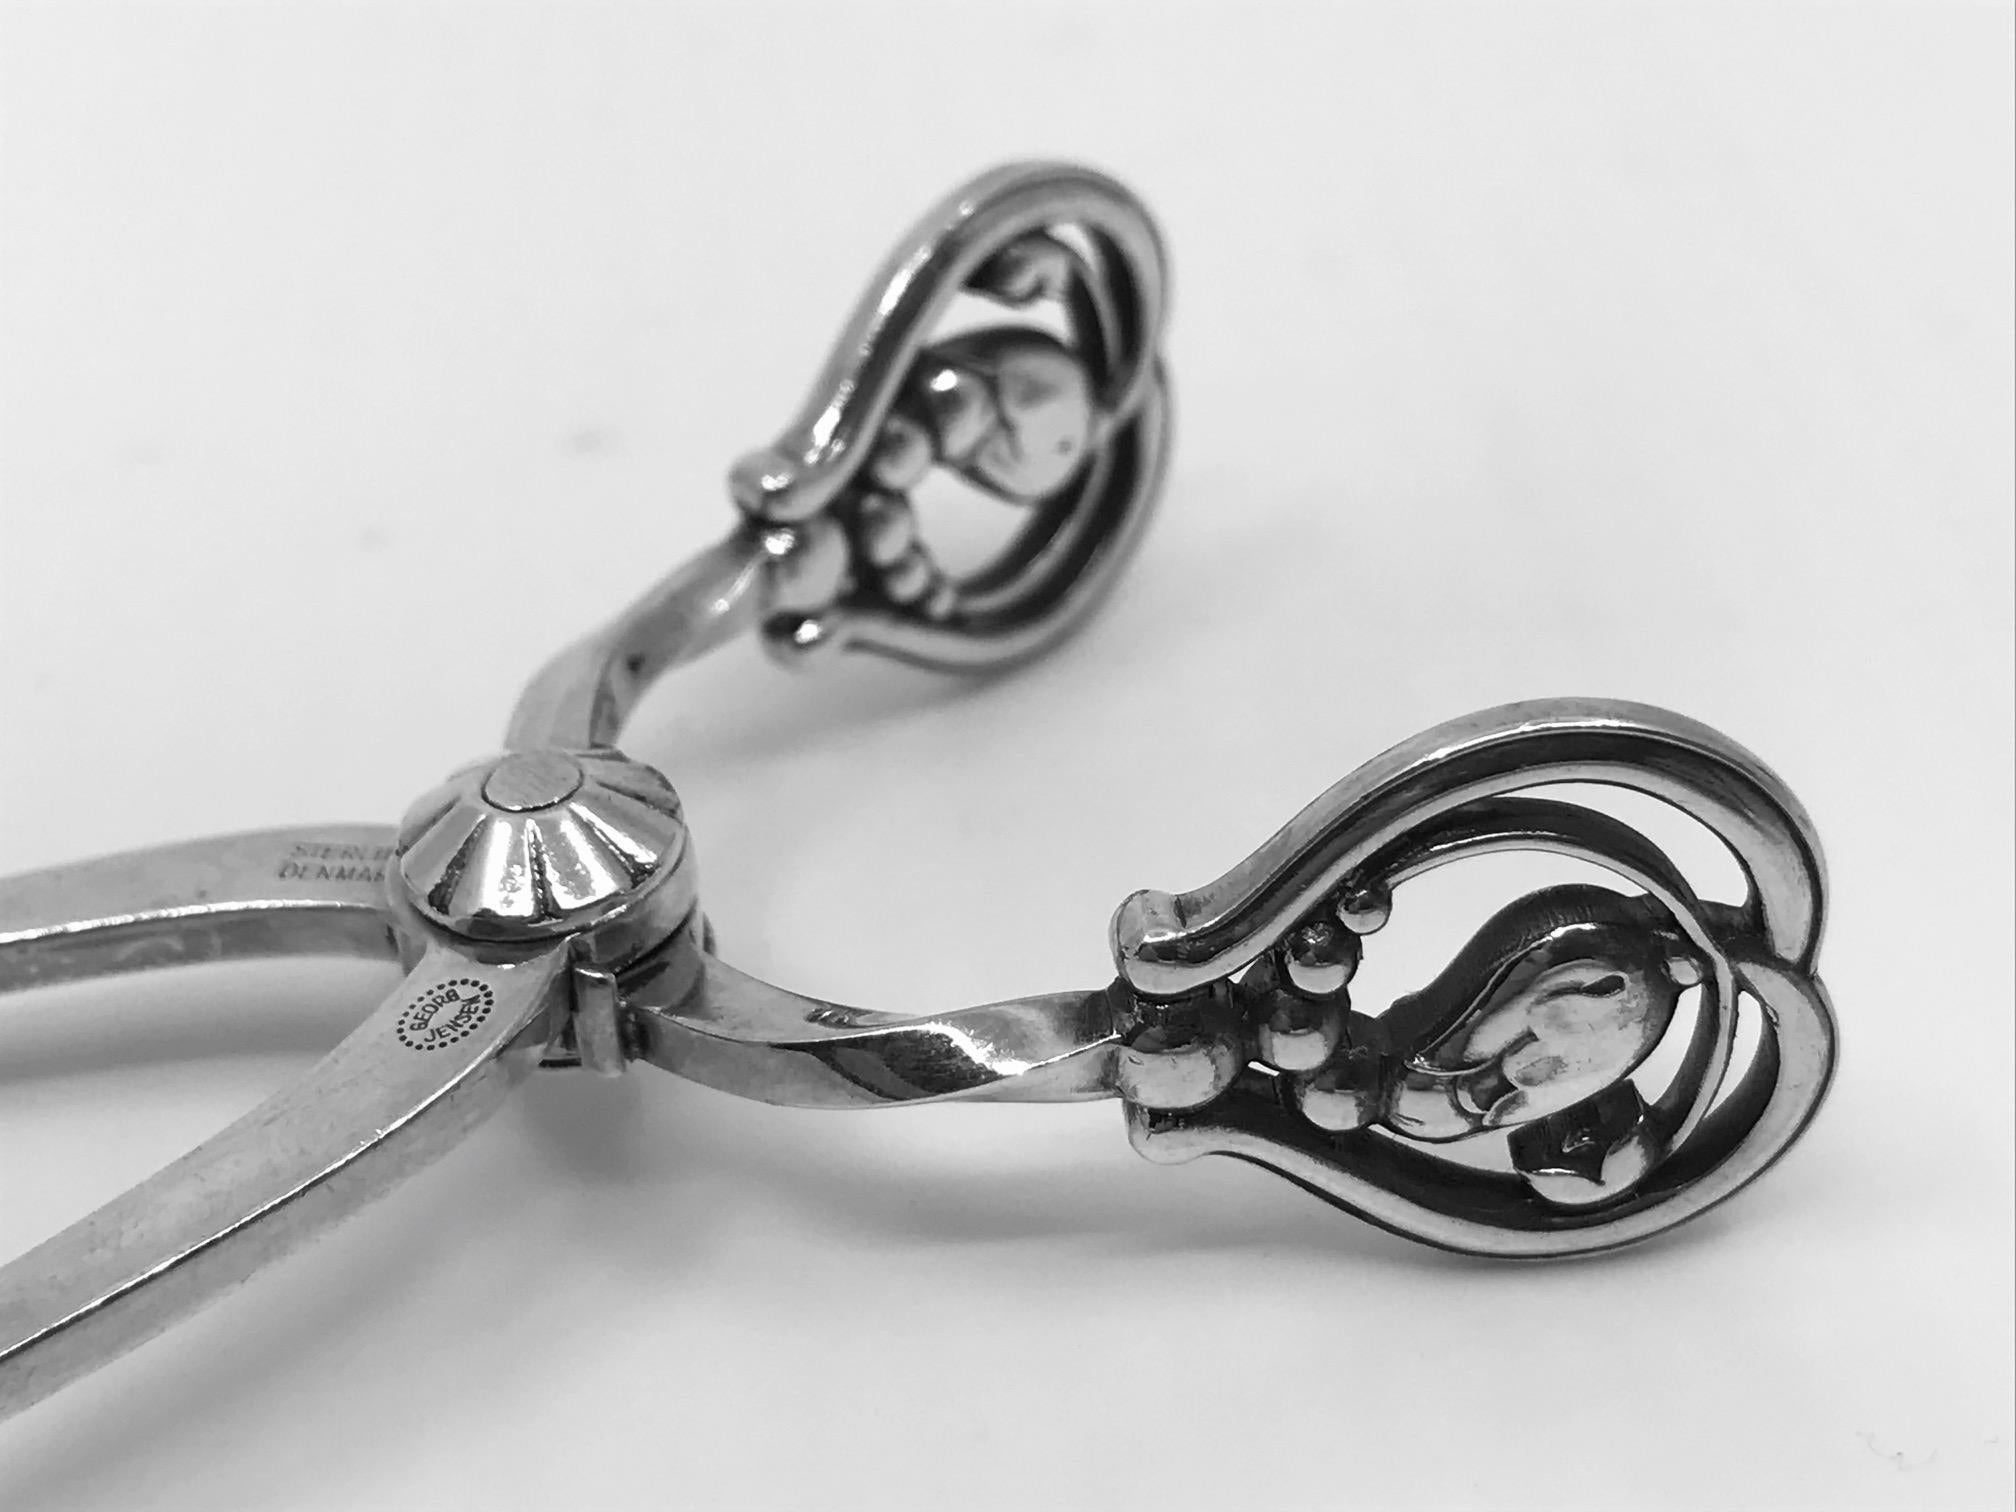 Sterling silver Georg Jensen Blossom sugar tongs, design by Georg Jensen.

Additional Information:
Material: Sterling Silver
Style:  Art Nouveau
Hallmarks: We have three pairs, one with Georg Jensen hallmark from 1922, one from the 1930s and one